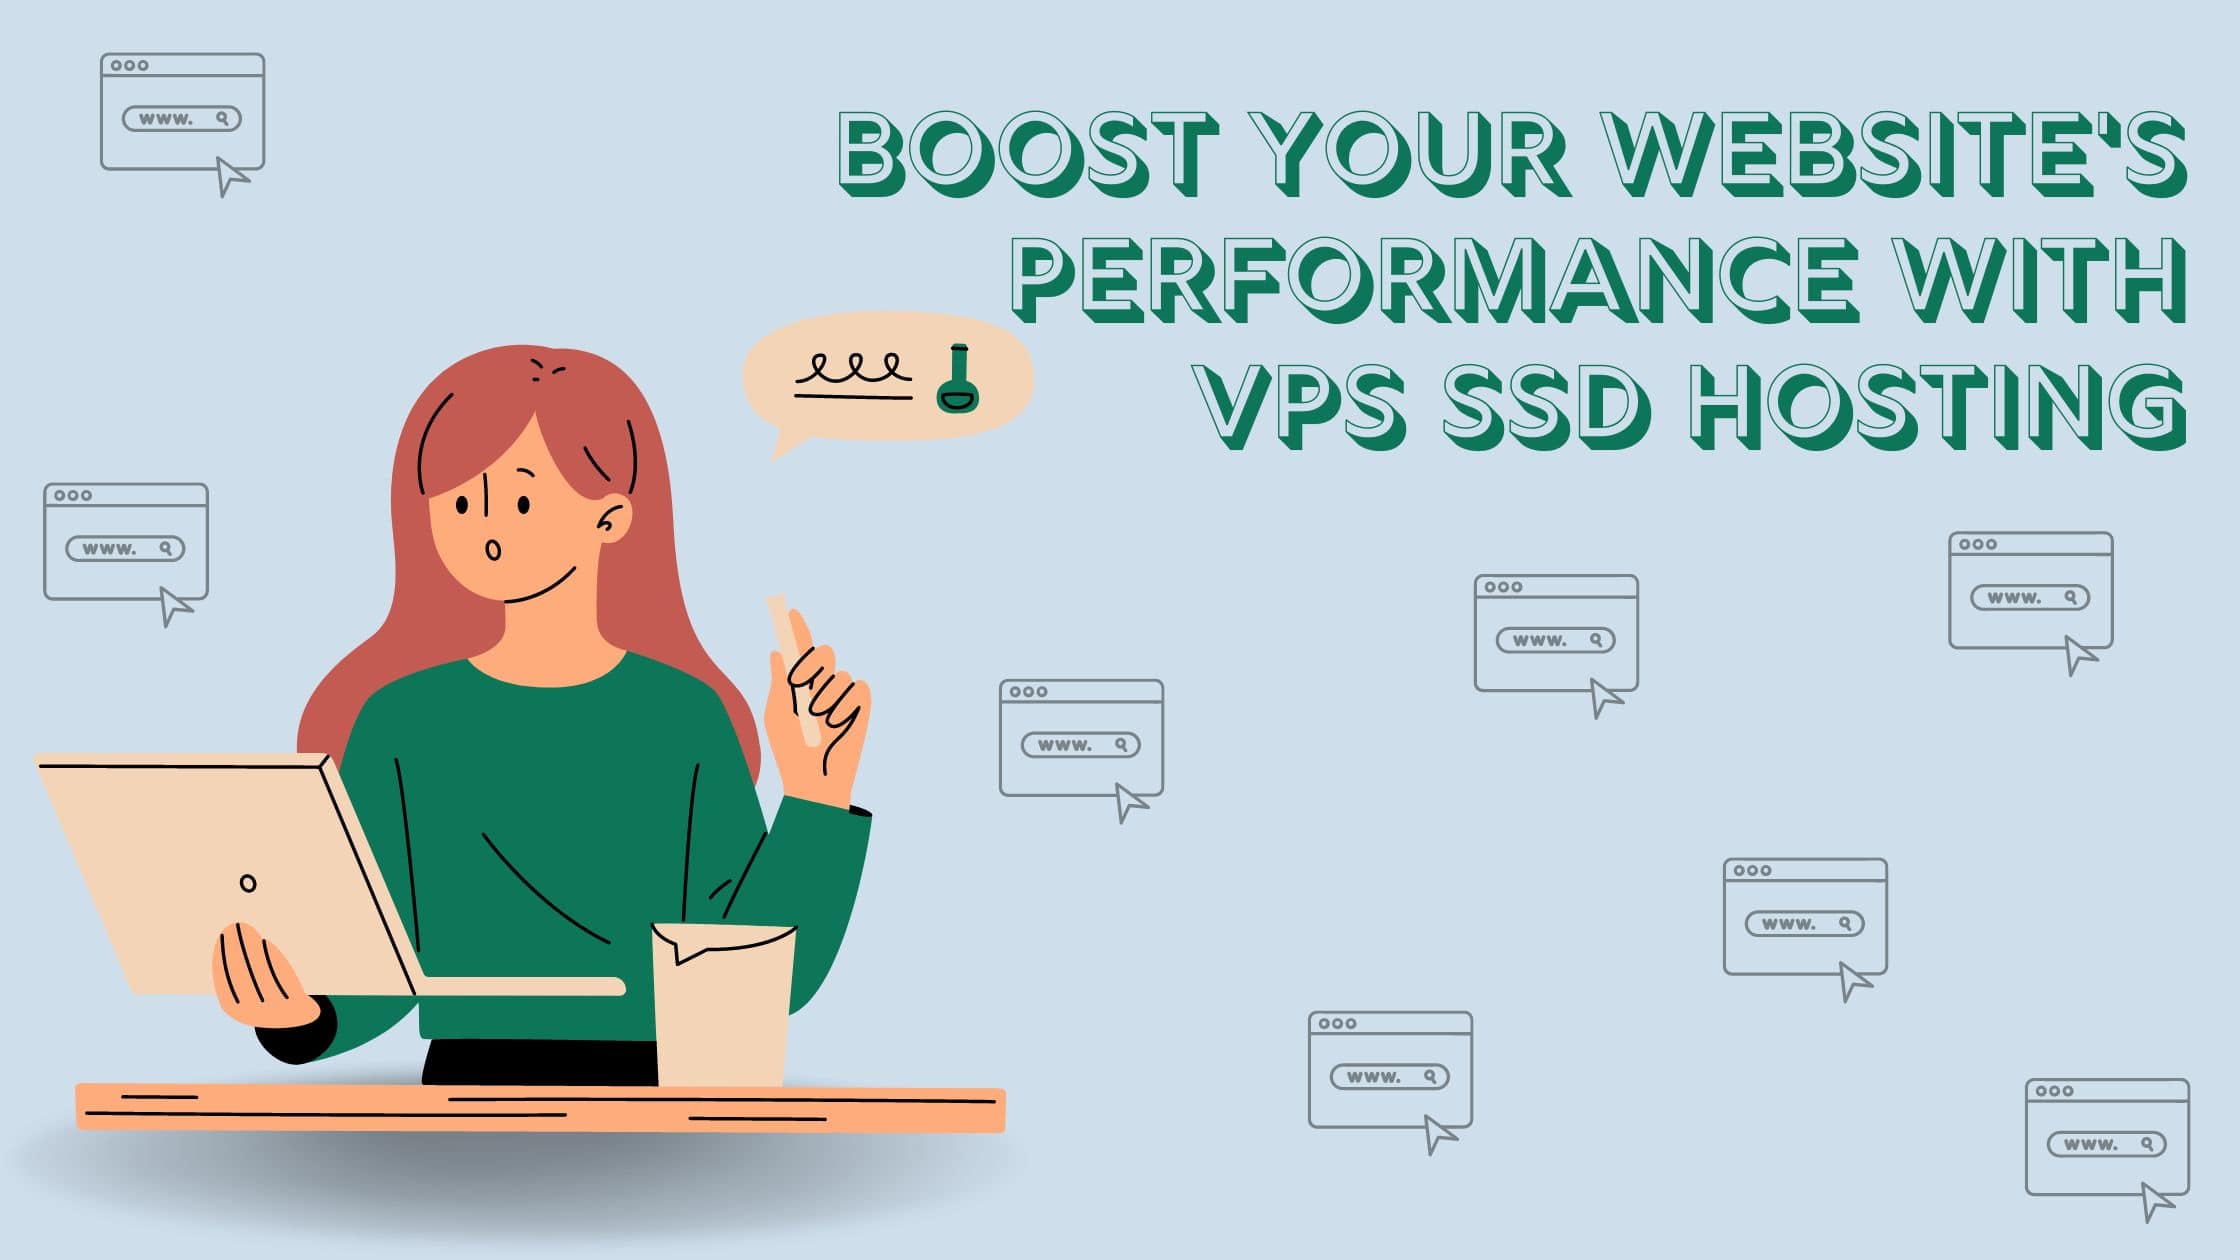 Boost your website performance with VPS SSD Hosting